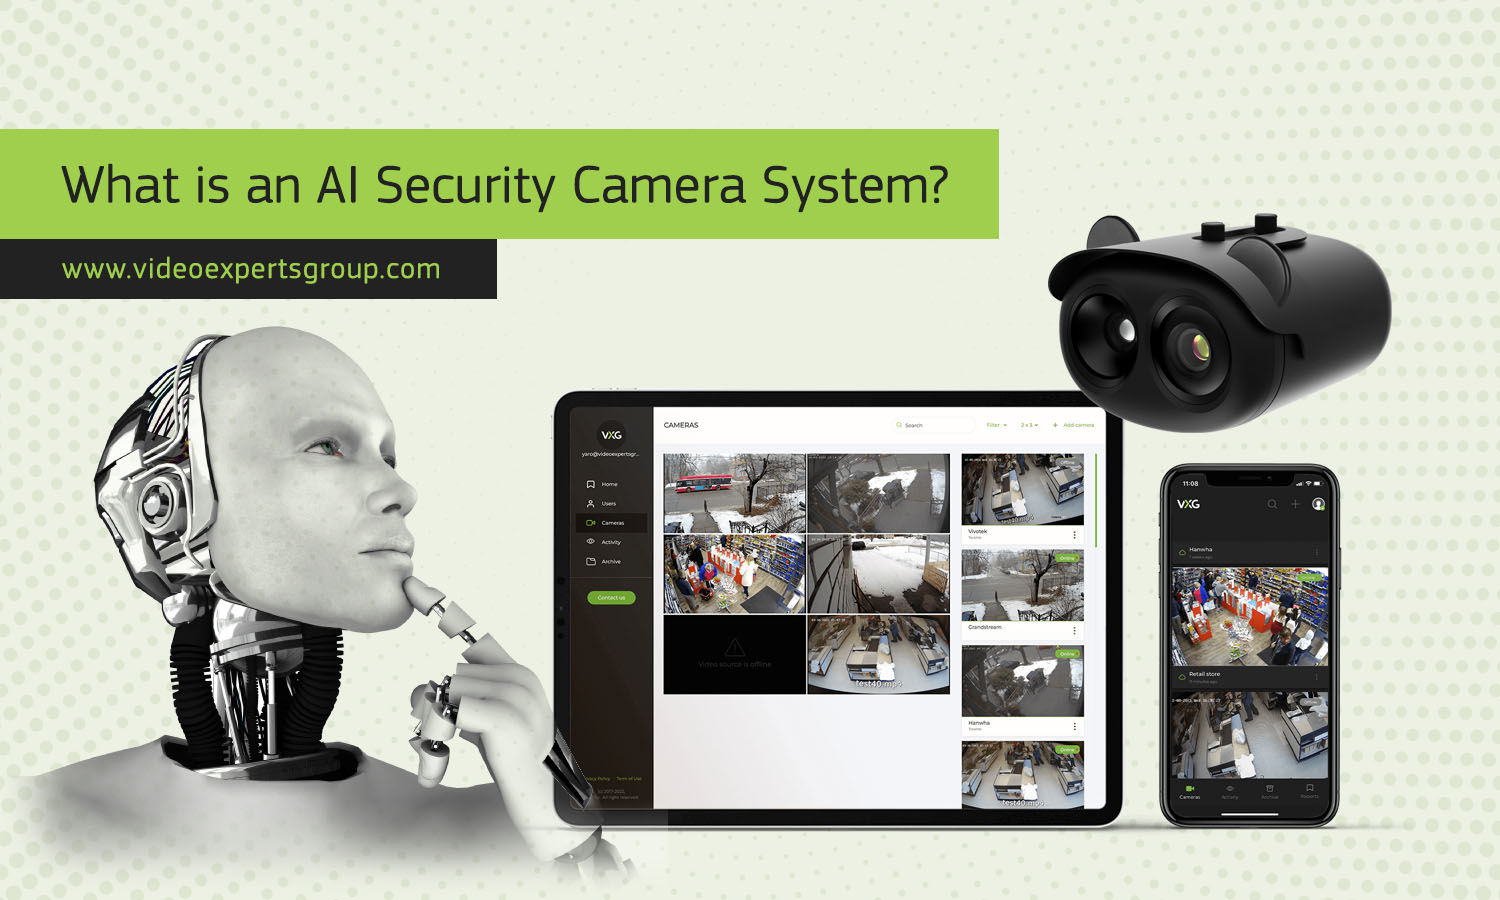 What is an AI Security Camera System?